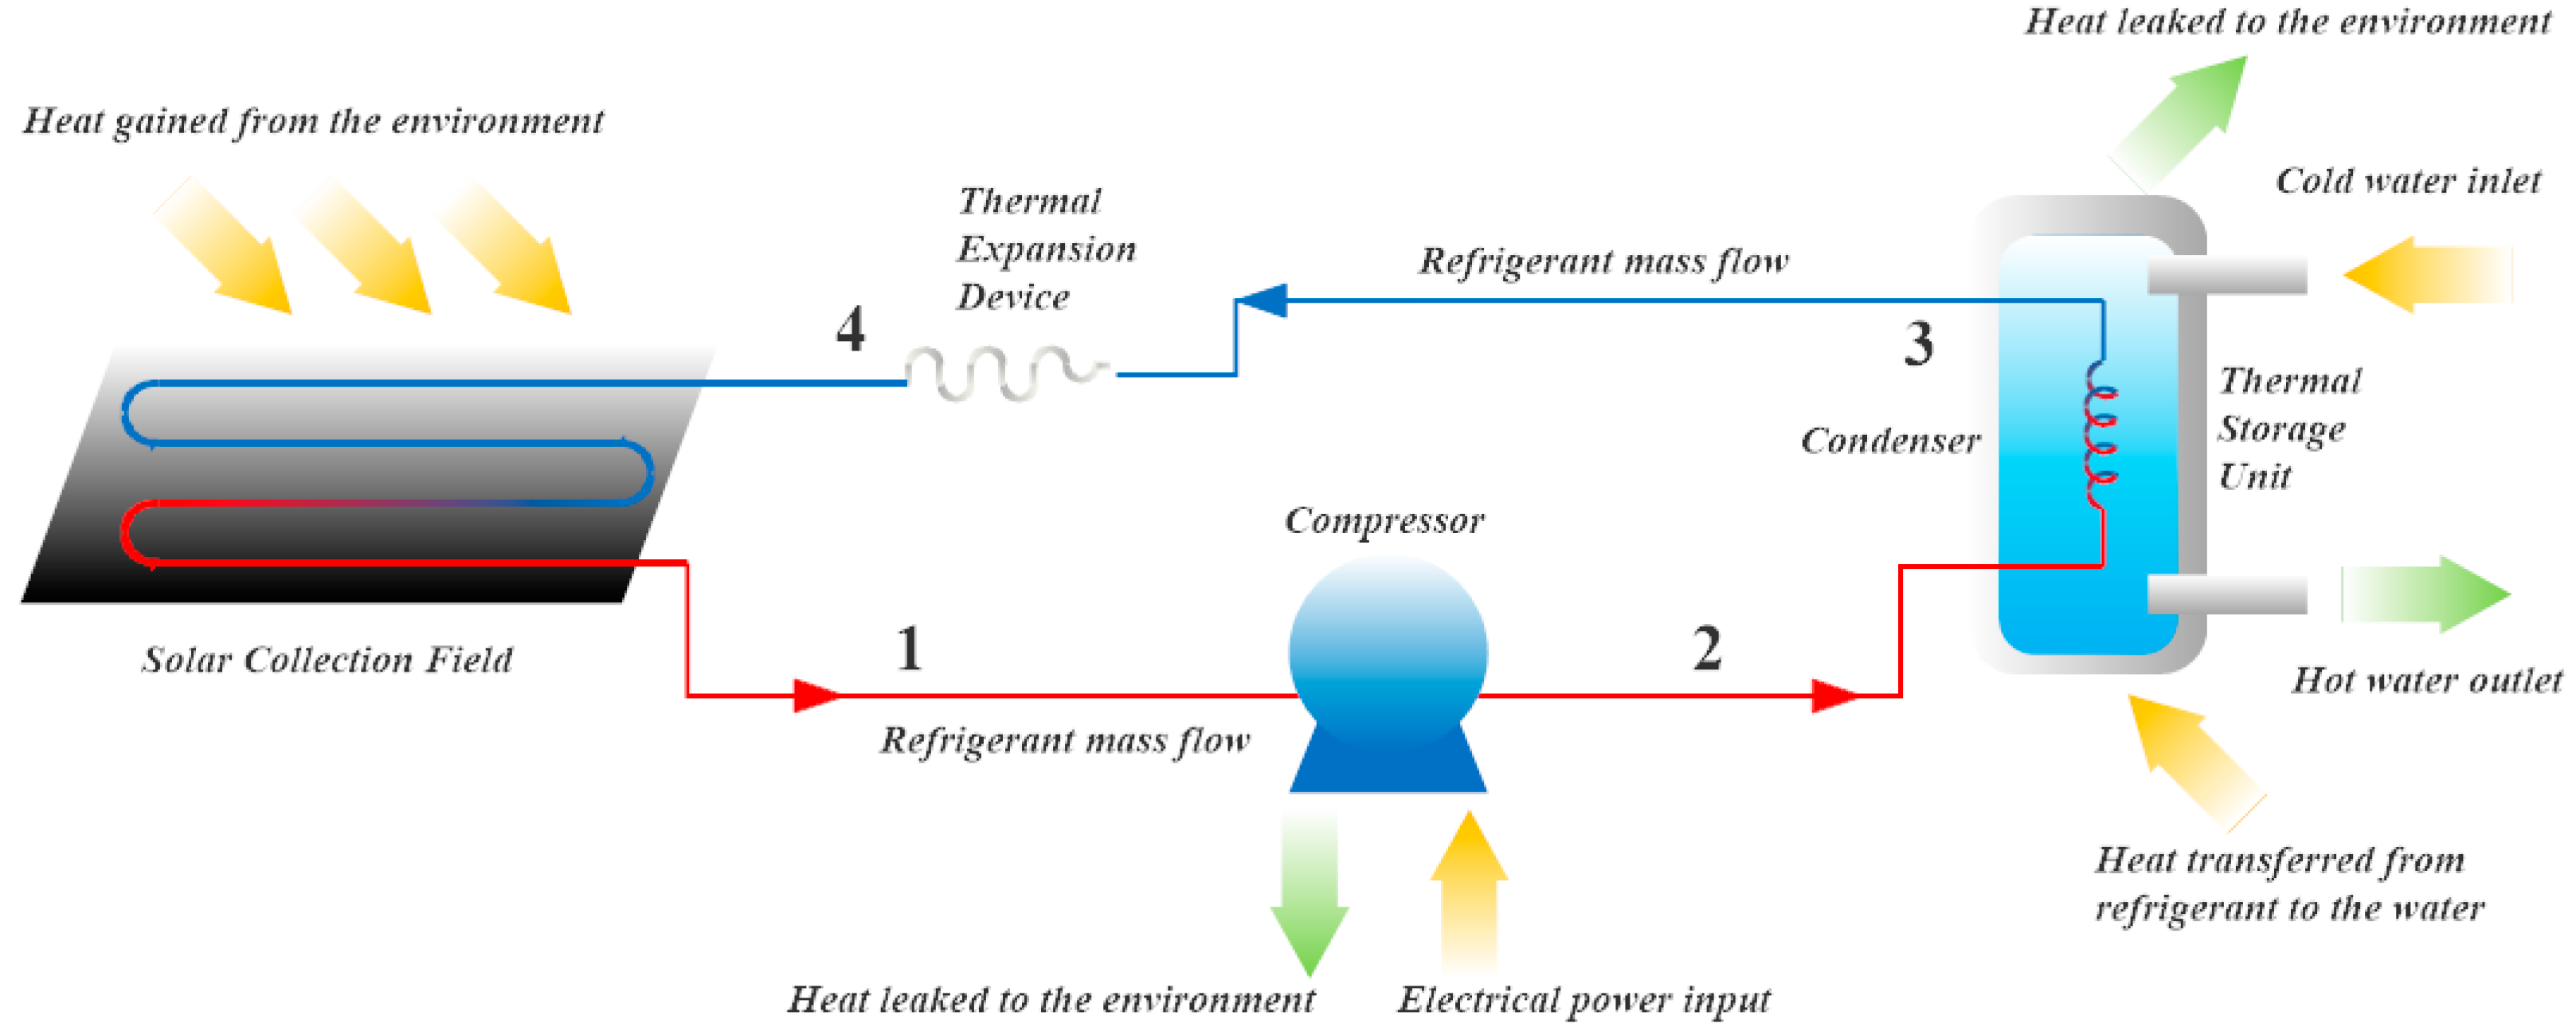 Energies | Free Full-Text Mathematical Thermal Modelling of a Direct-Expansion Solar-Assisted Heat Pump Multi-Objective Optimization Based the Energy Demand | HTML